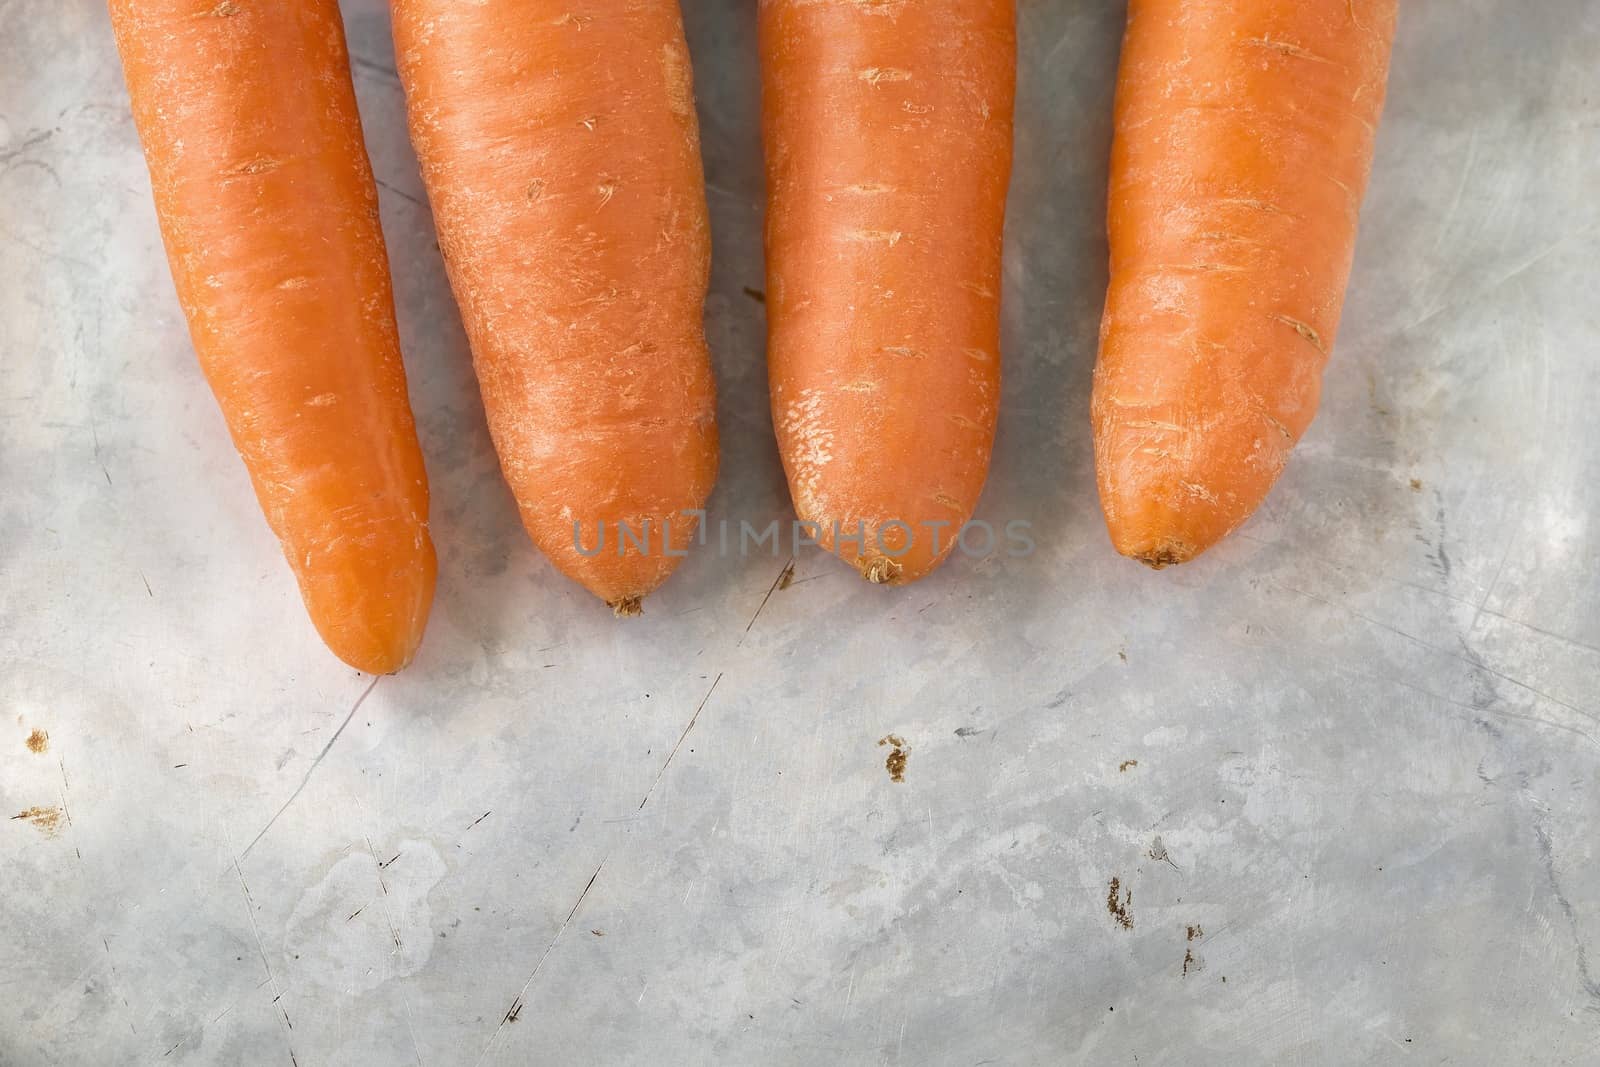 Picture of carrots on a grunge metal surface